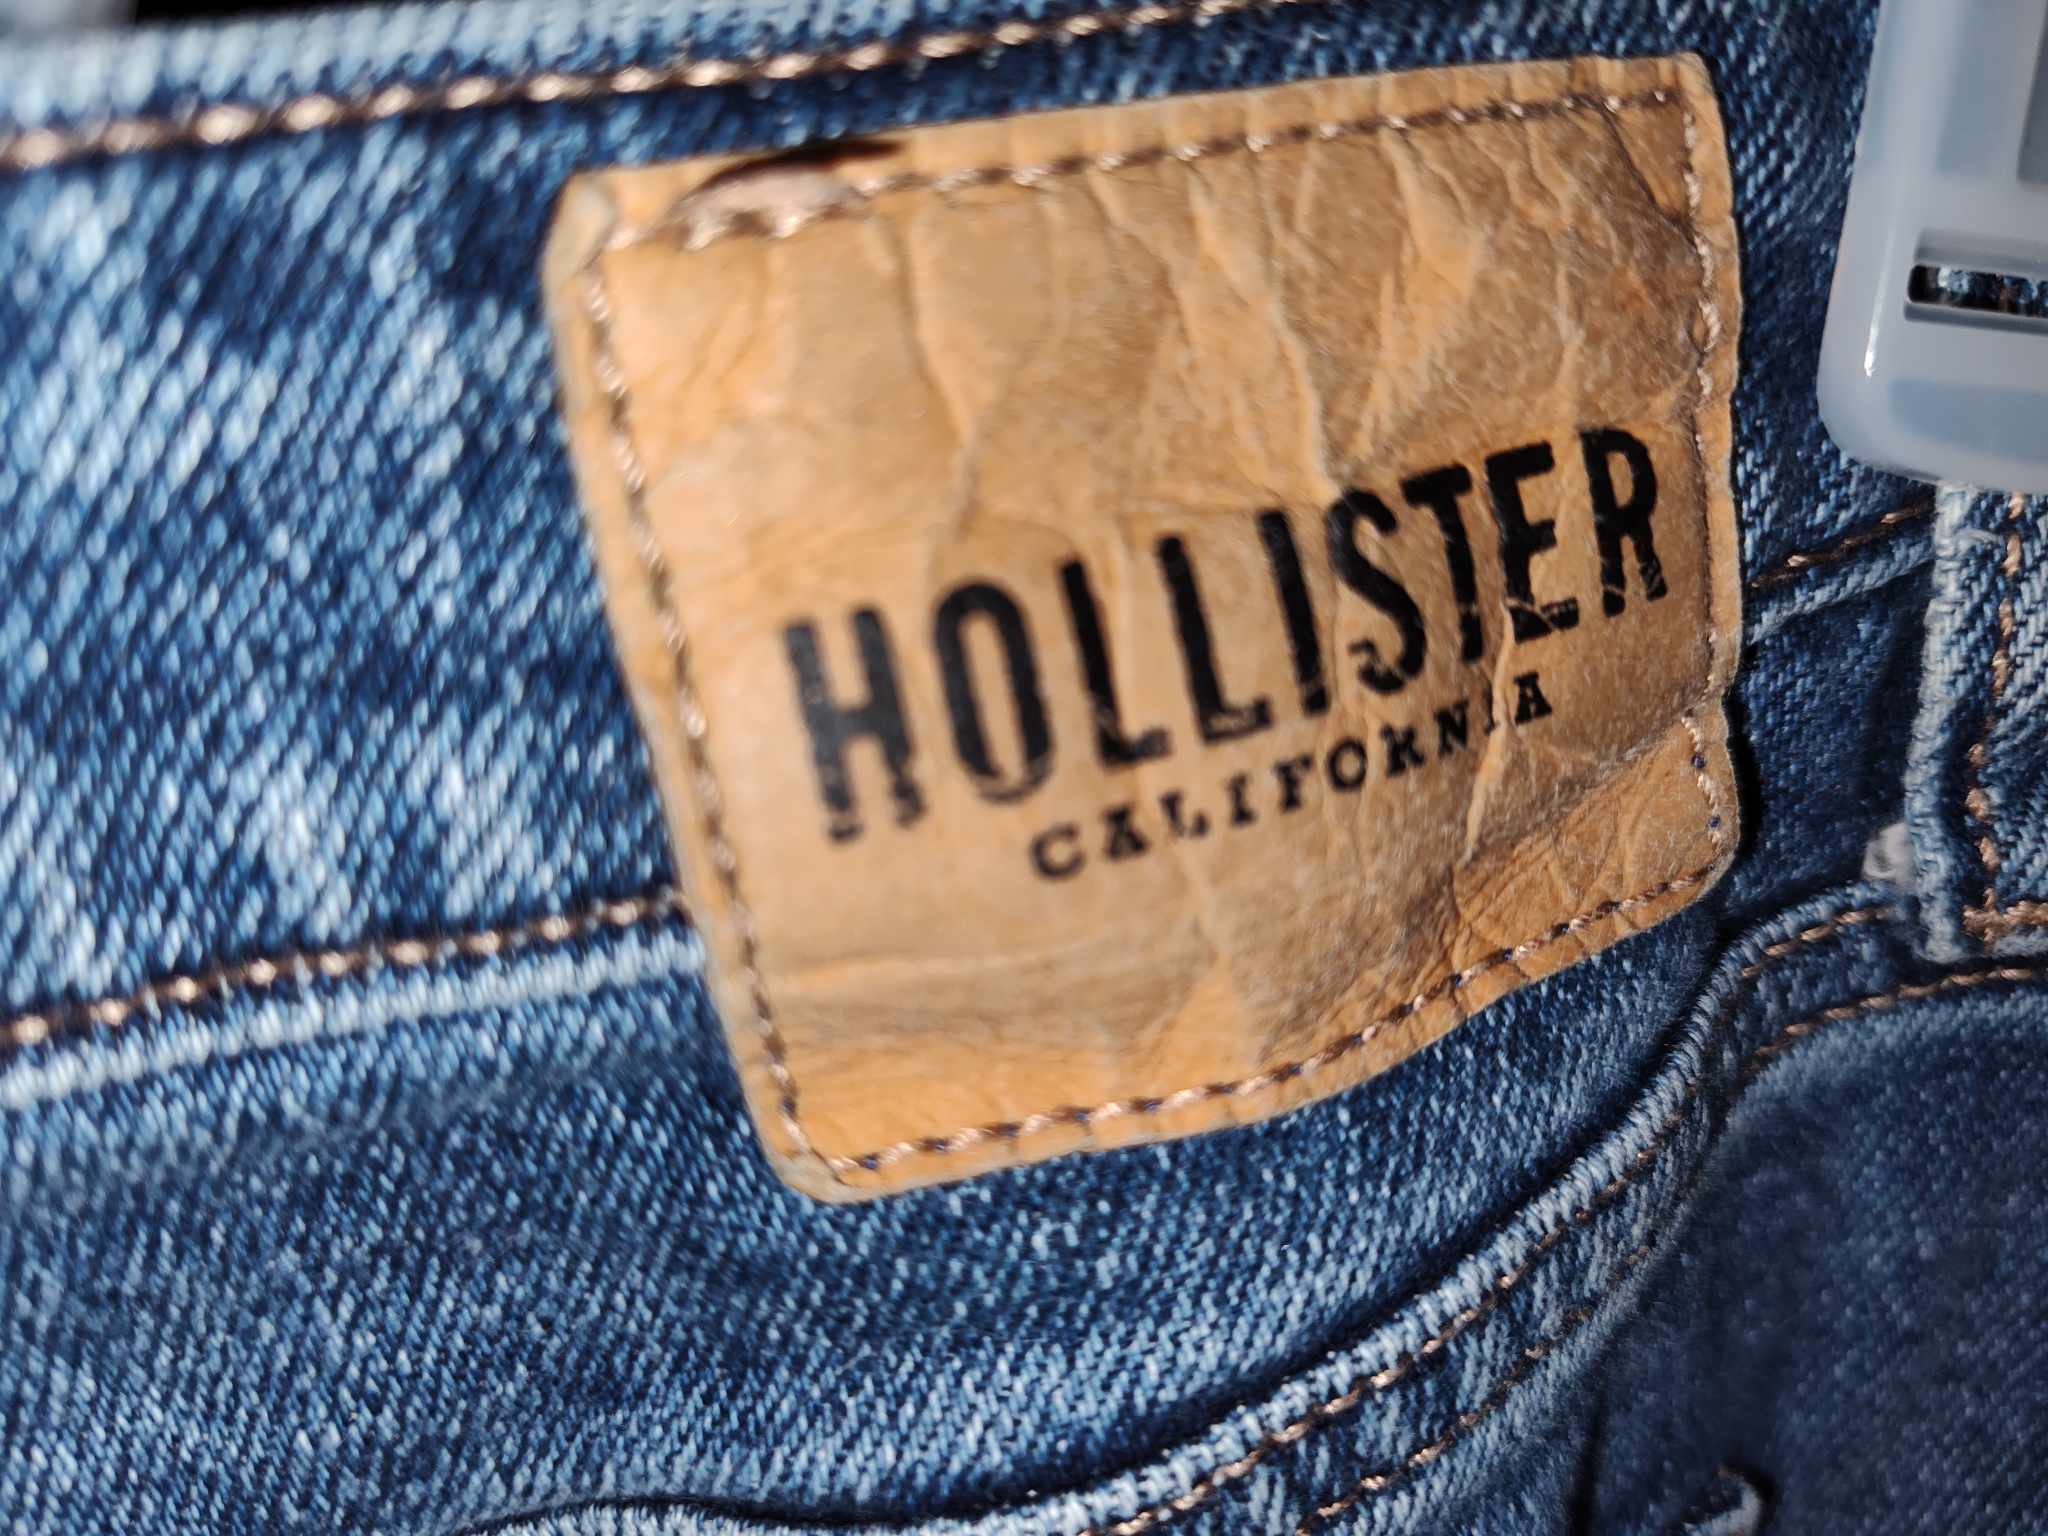 Women's Holister Distressed Jeans - preowned